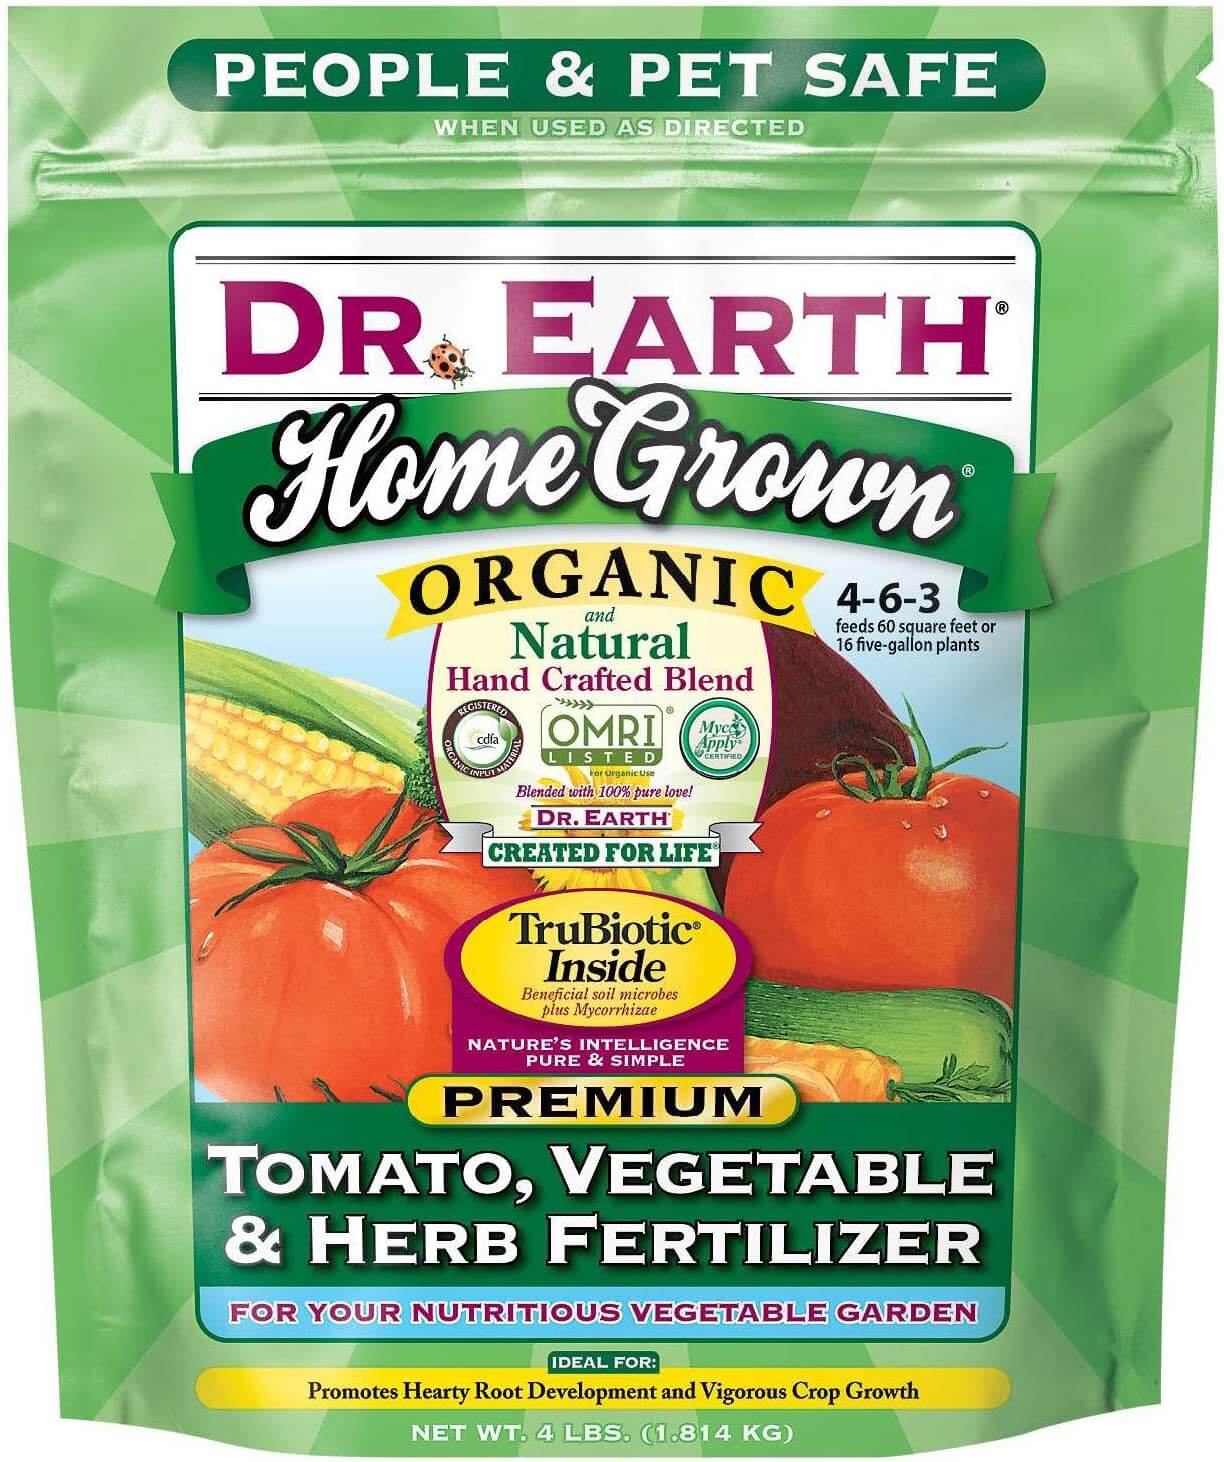 Dr. Earth Home Grown Tomato, Vegetable & Herb